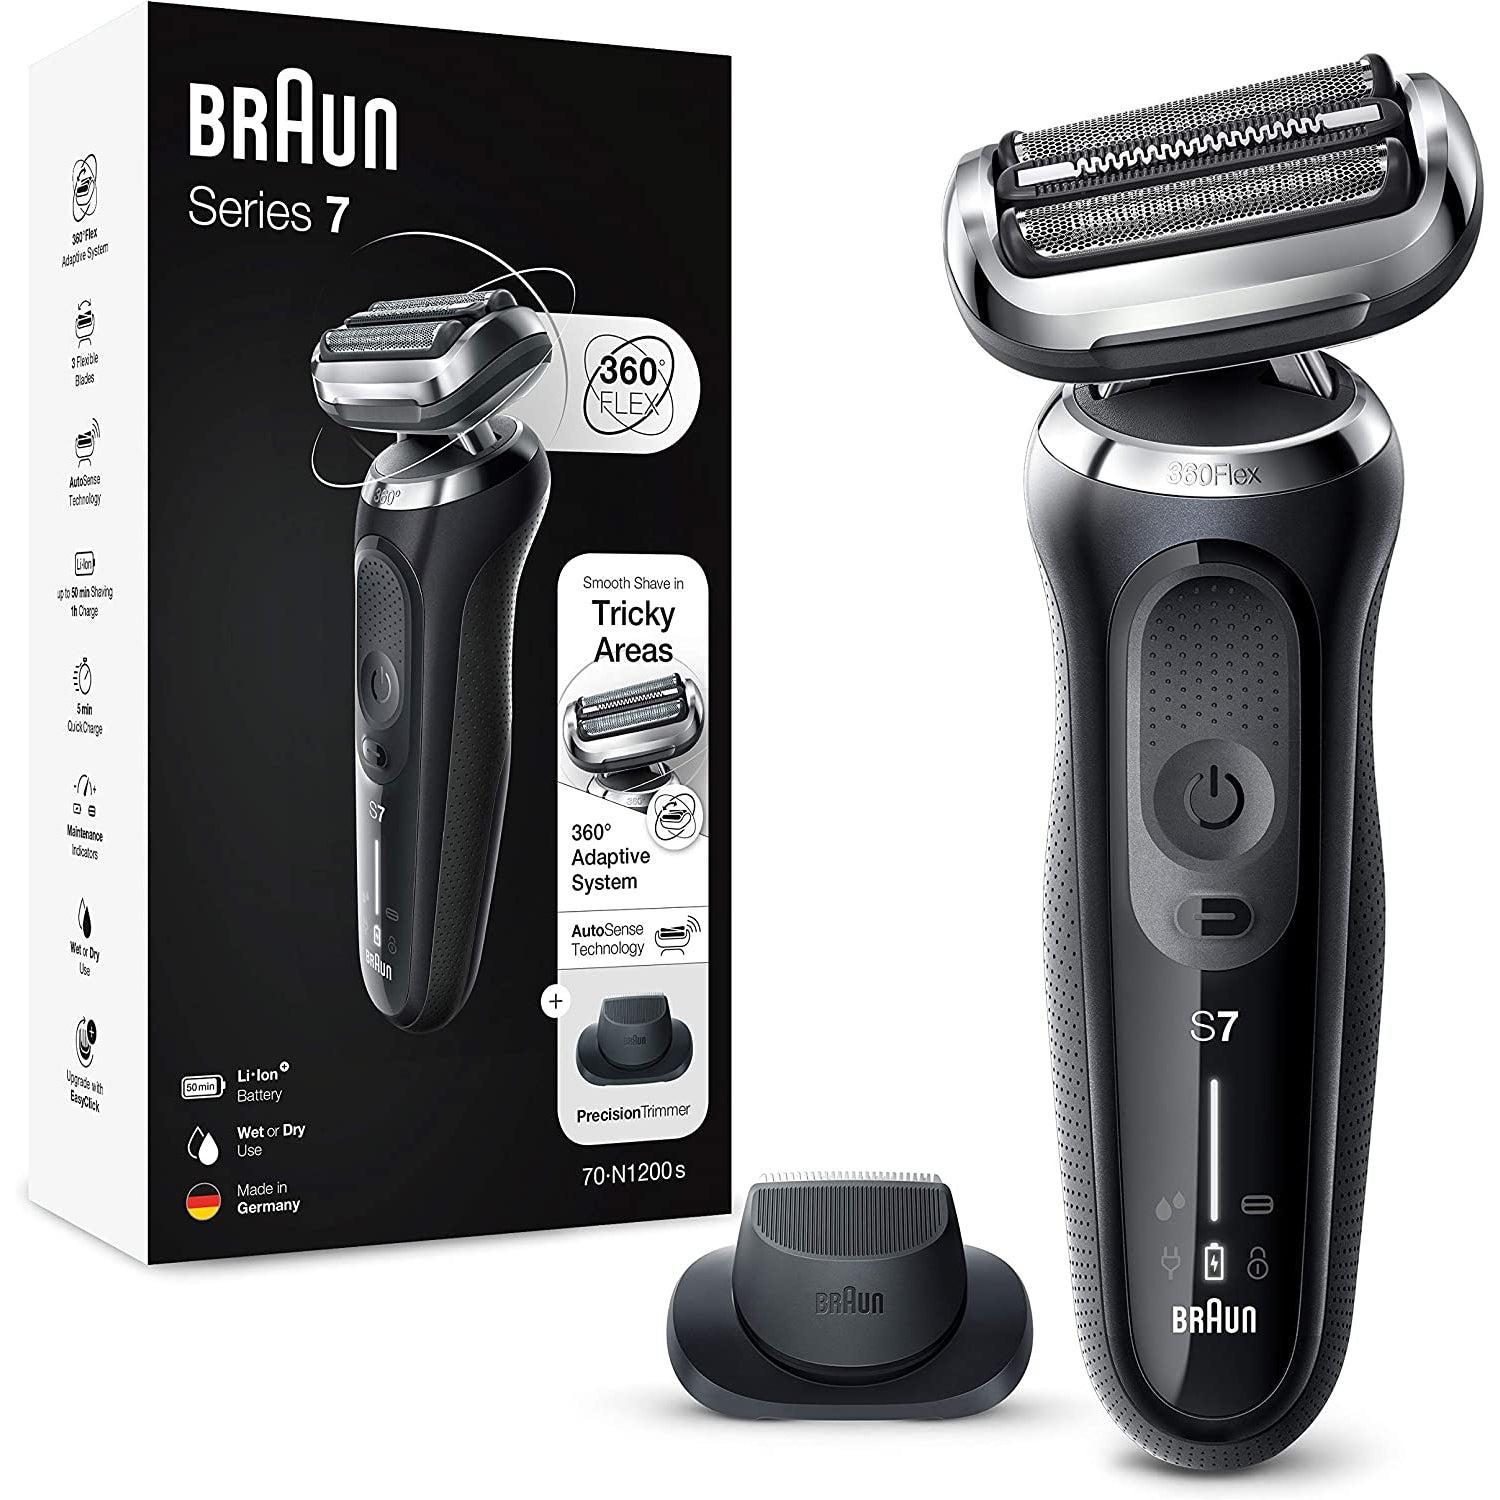 Braun Men's Series 7 70-N1200s Wet and Dry Shaver with Travel Case - Black - Healthxpress.ie